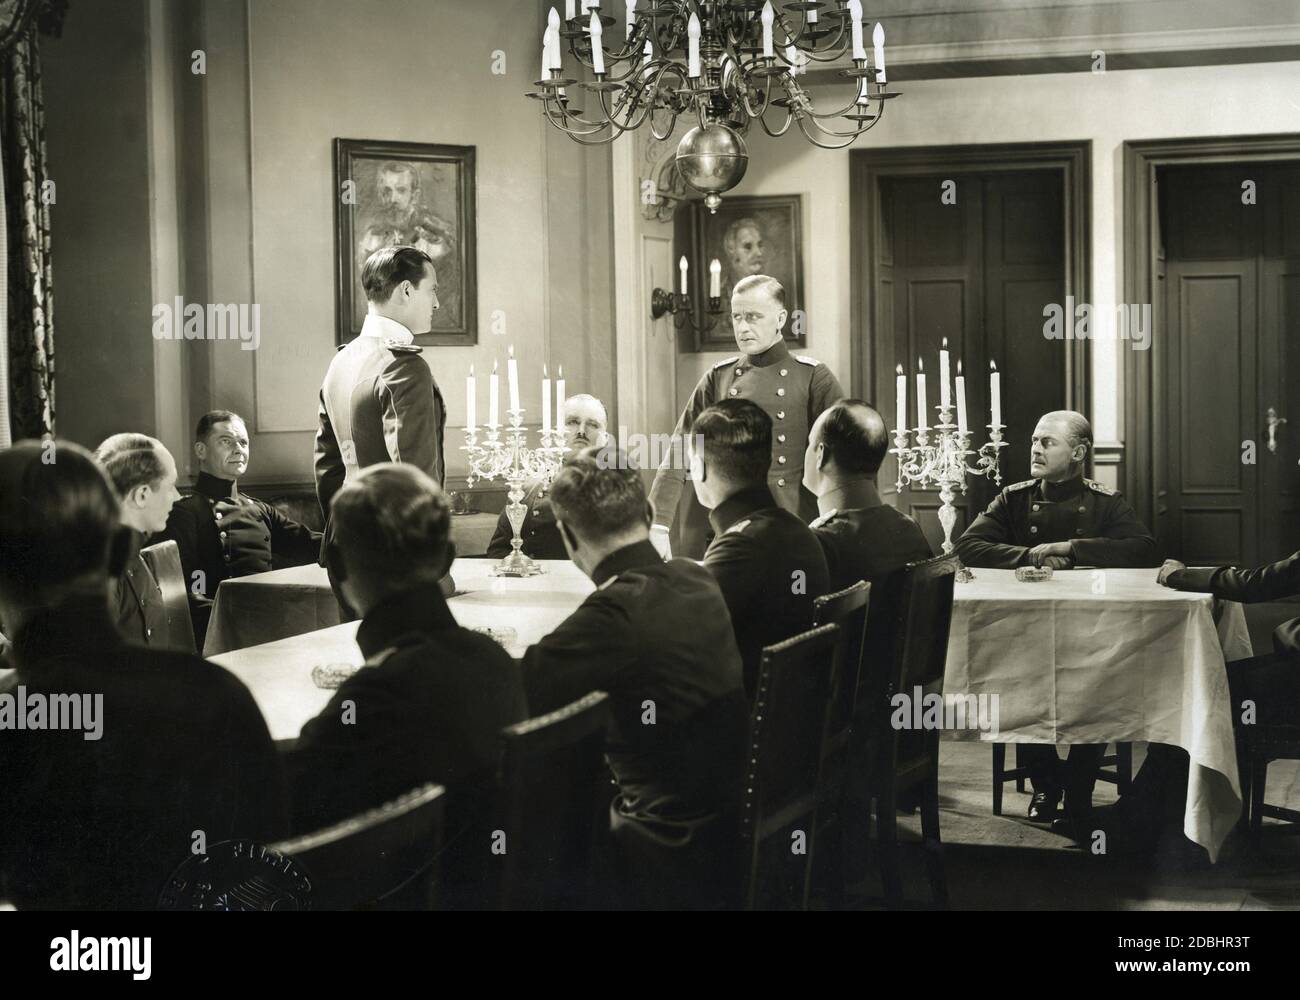 Soldiers of the German Army at a table. Film still. Stock Photo